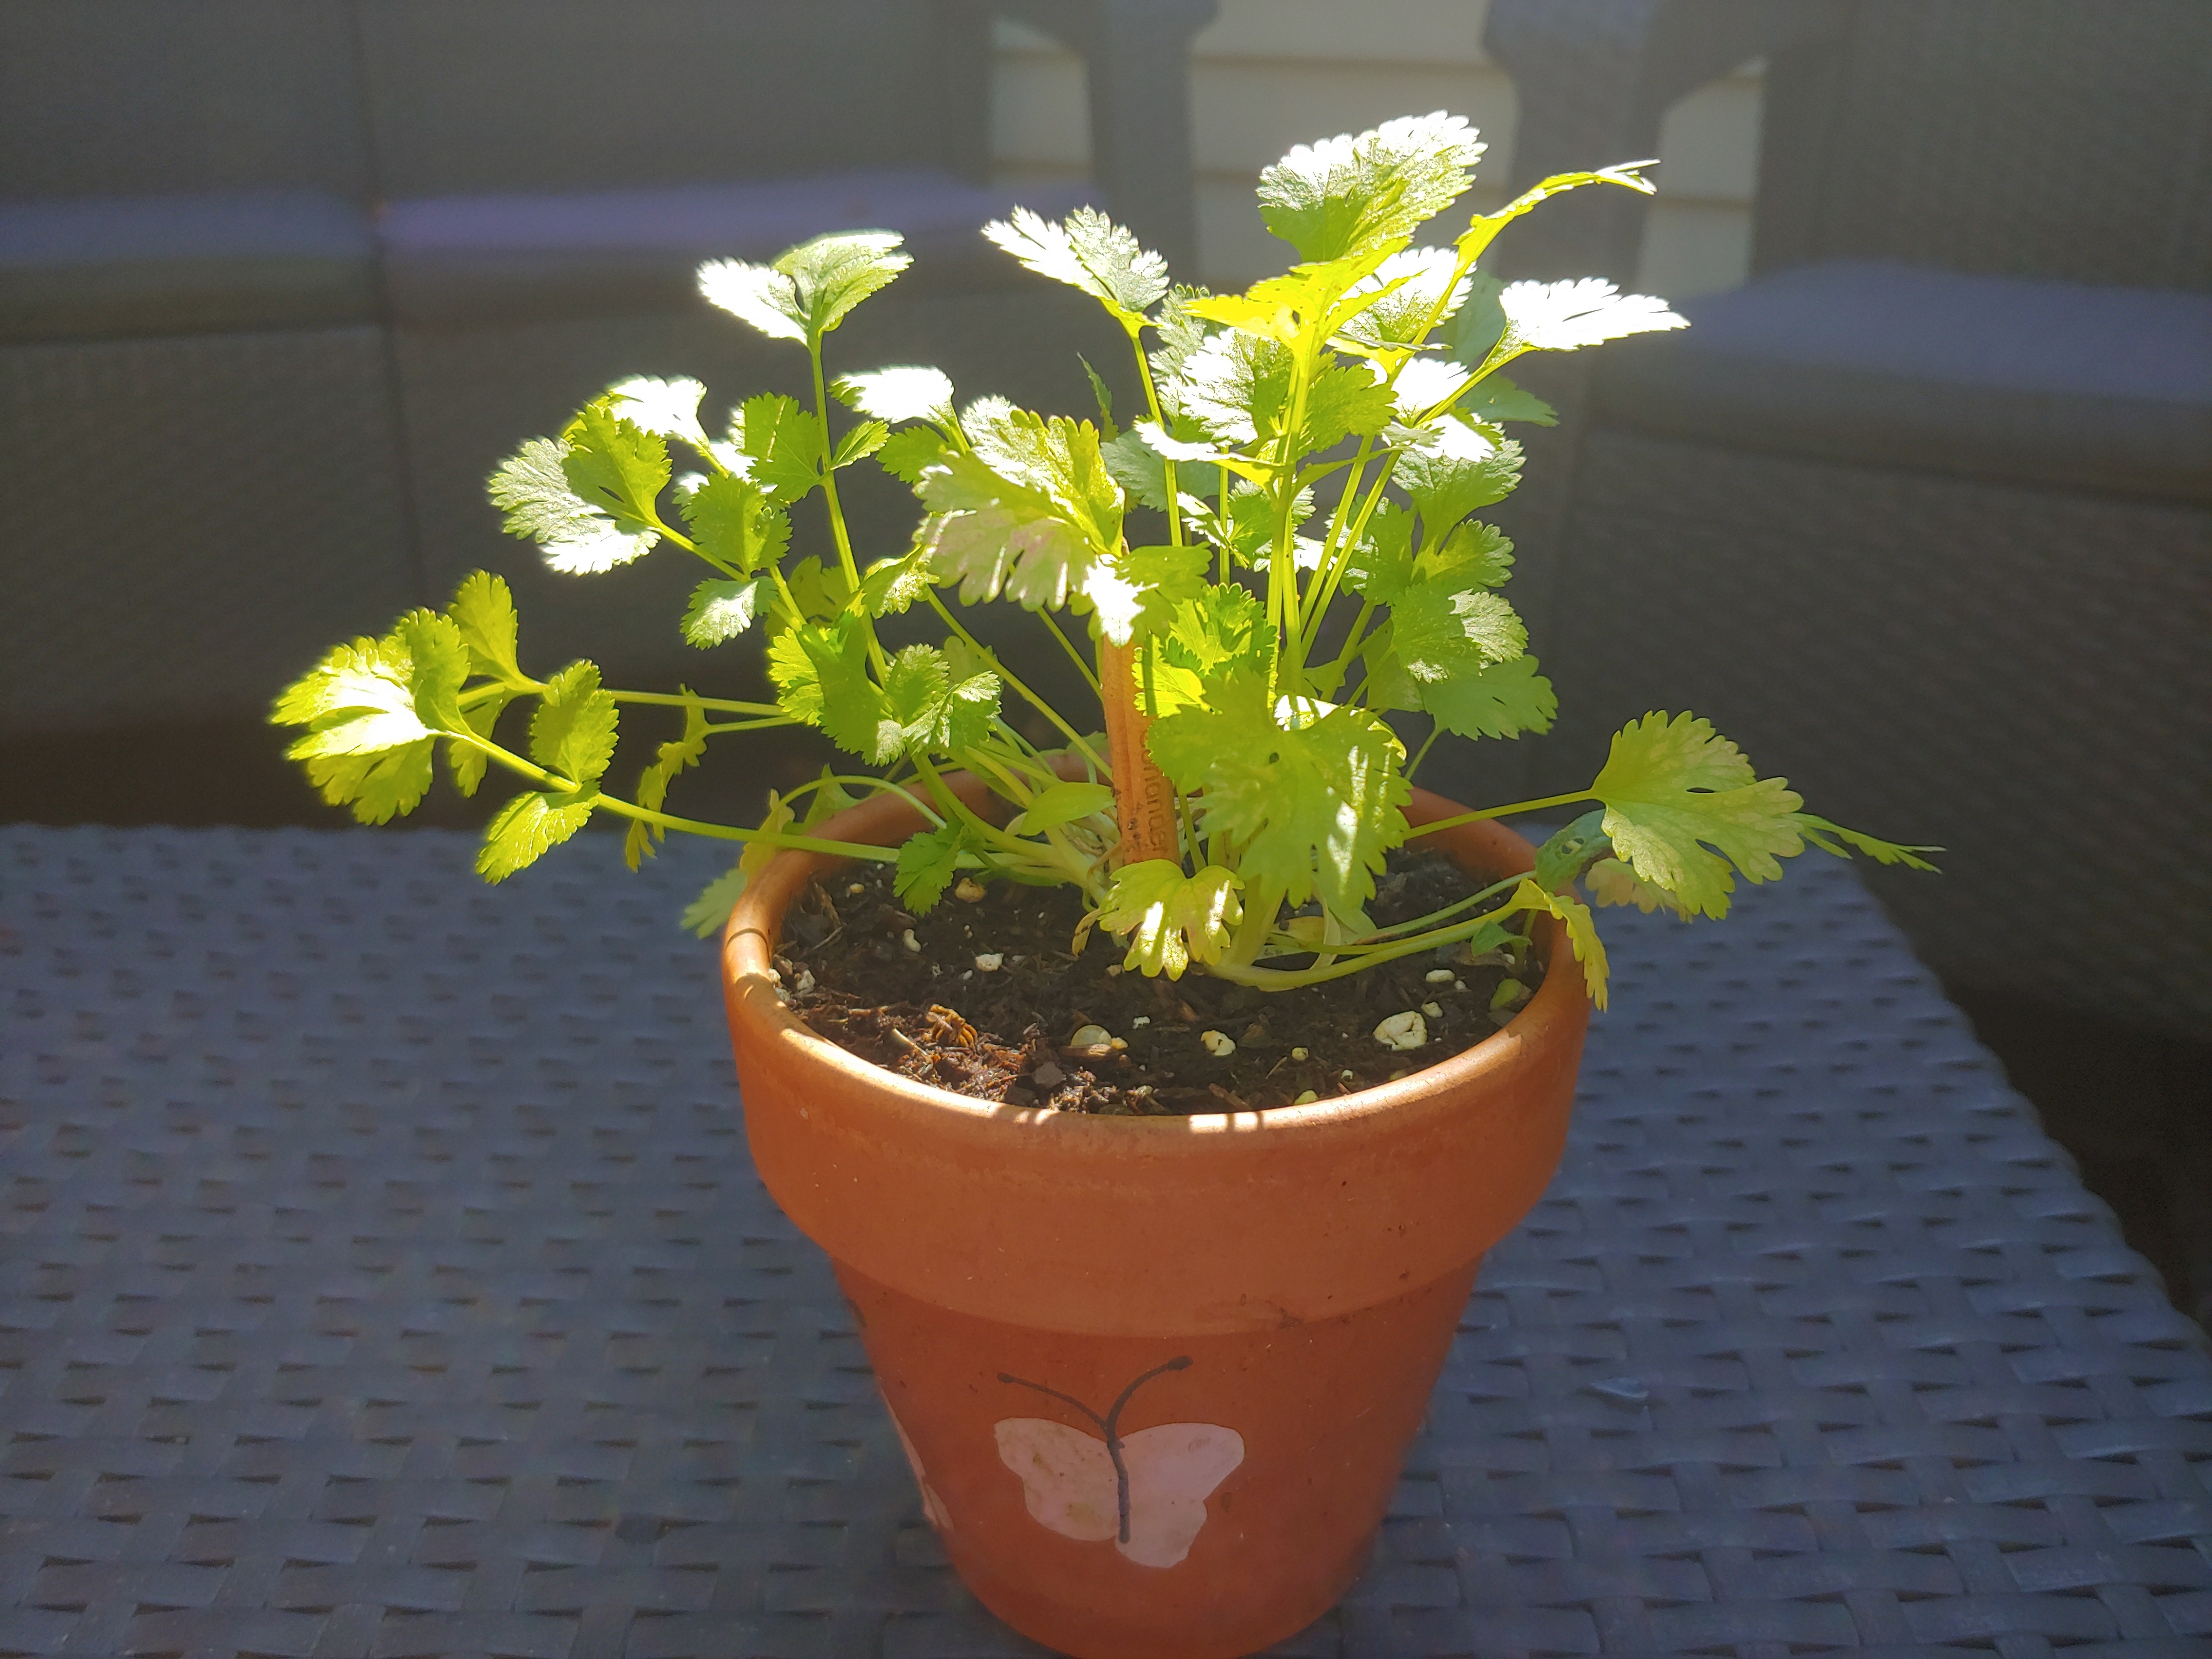 Coriander growing in a small clay pot